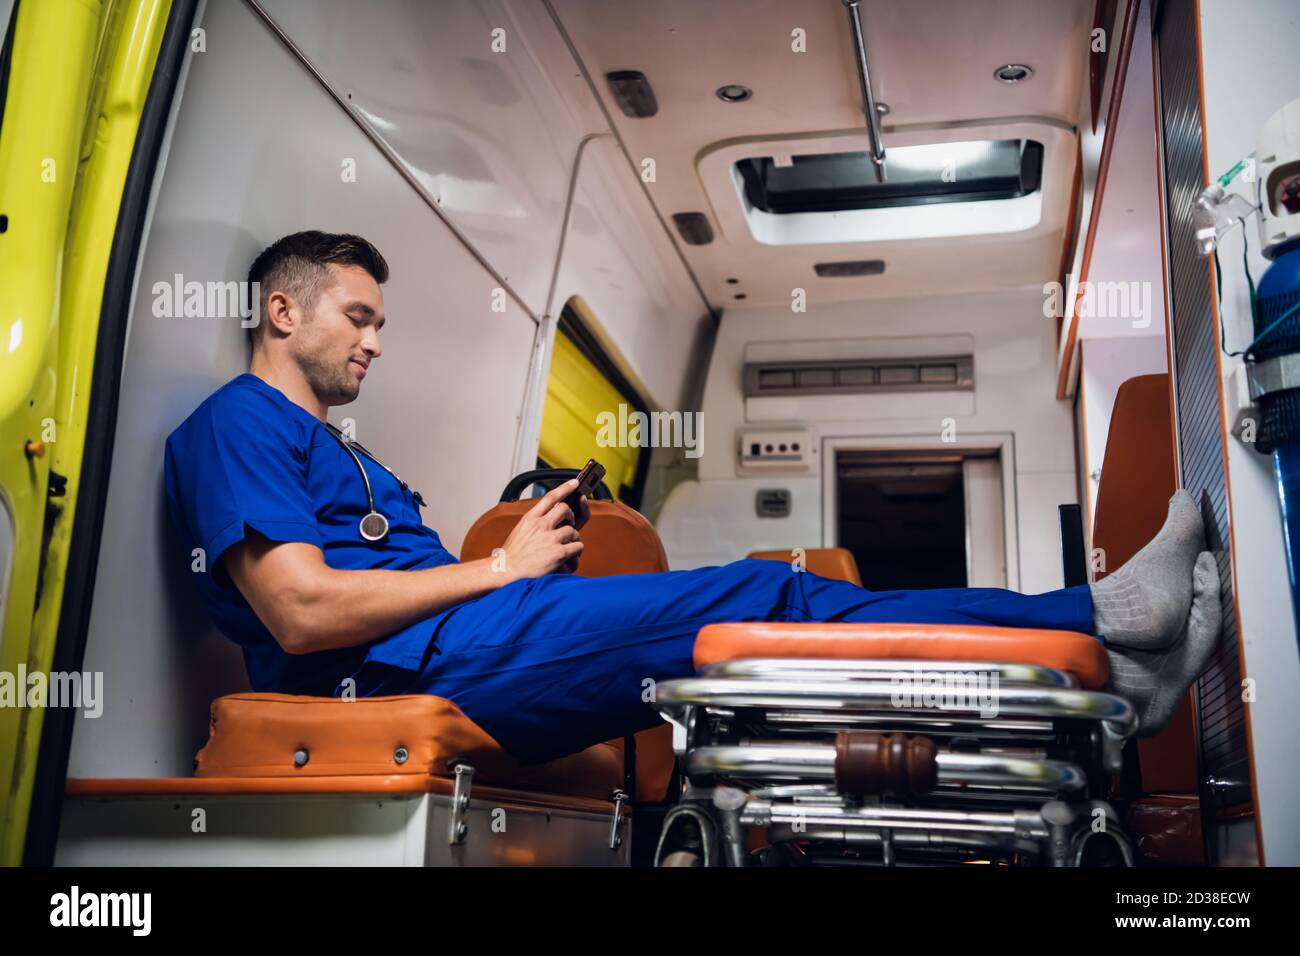 Male paramedic in a blue uniform resting and talking to someone over the video call on his smartphone in the ambulance car. Stock Photo